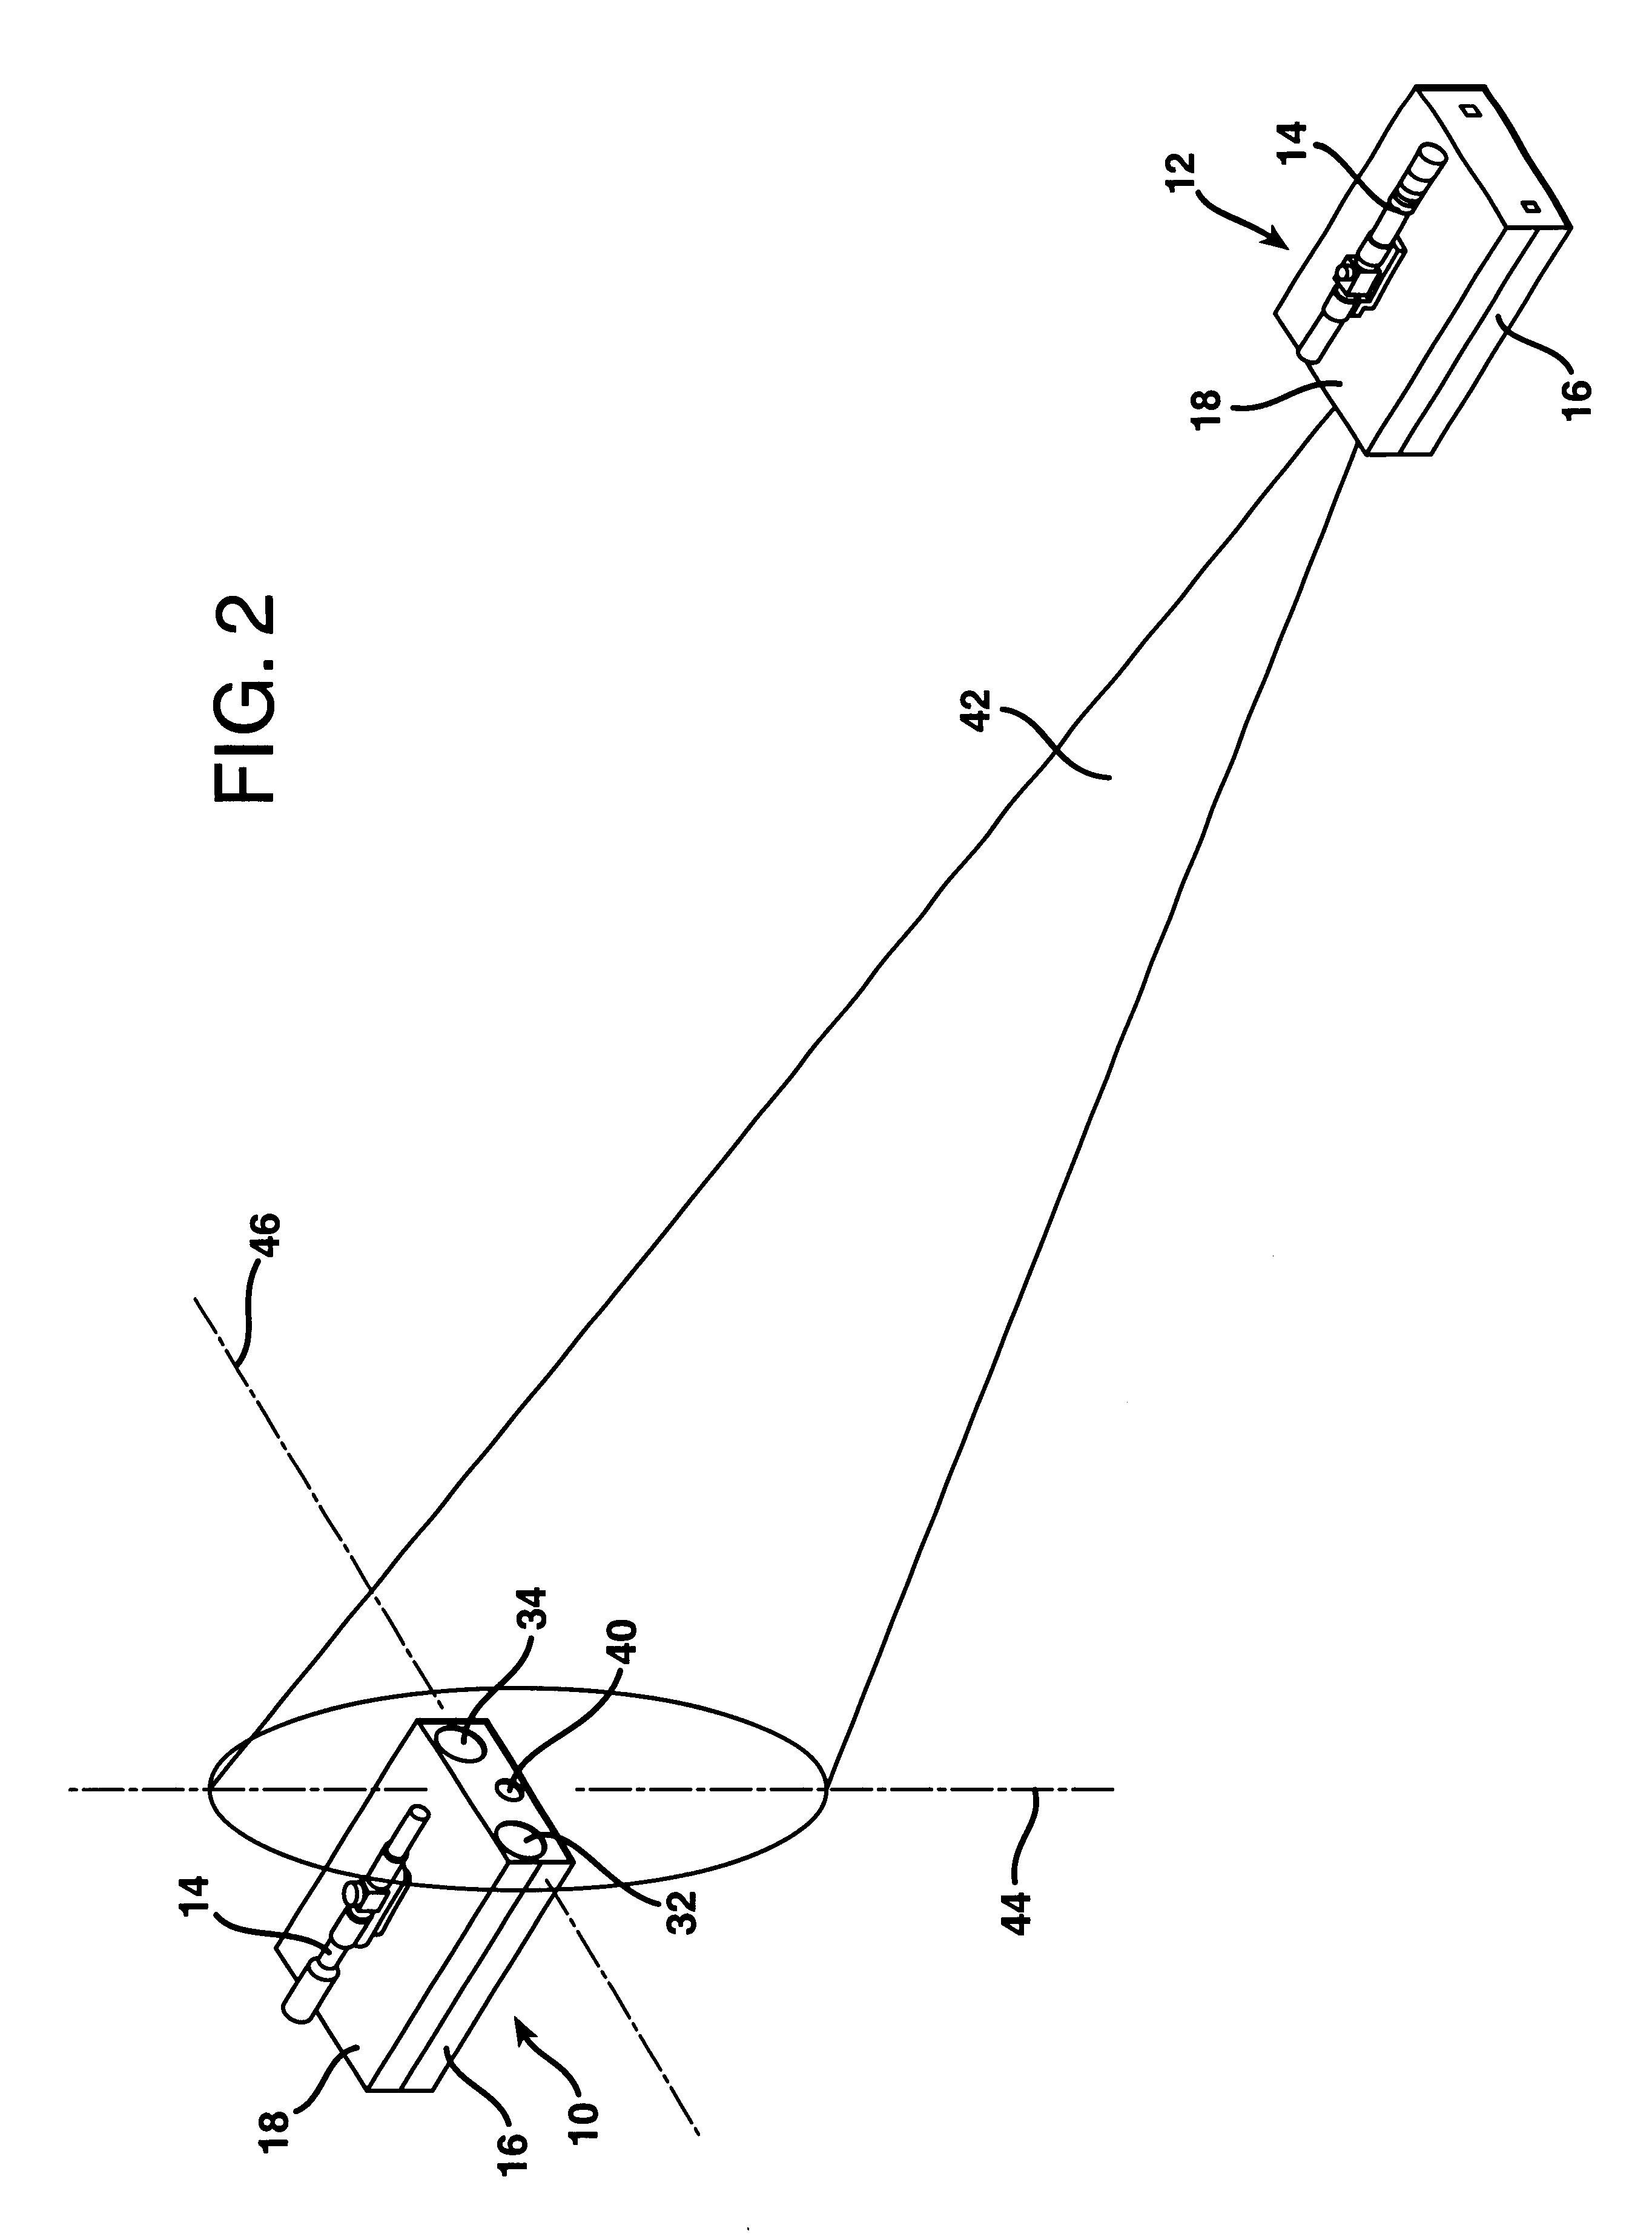 Atmospheric turbulence resistant open-air optical communication system